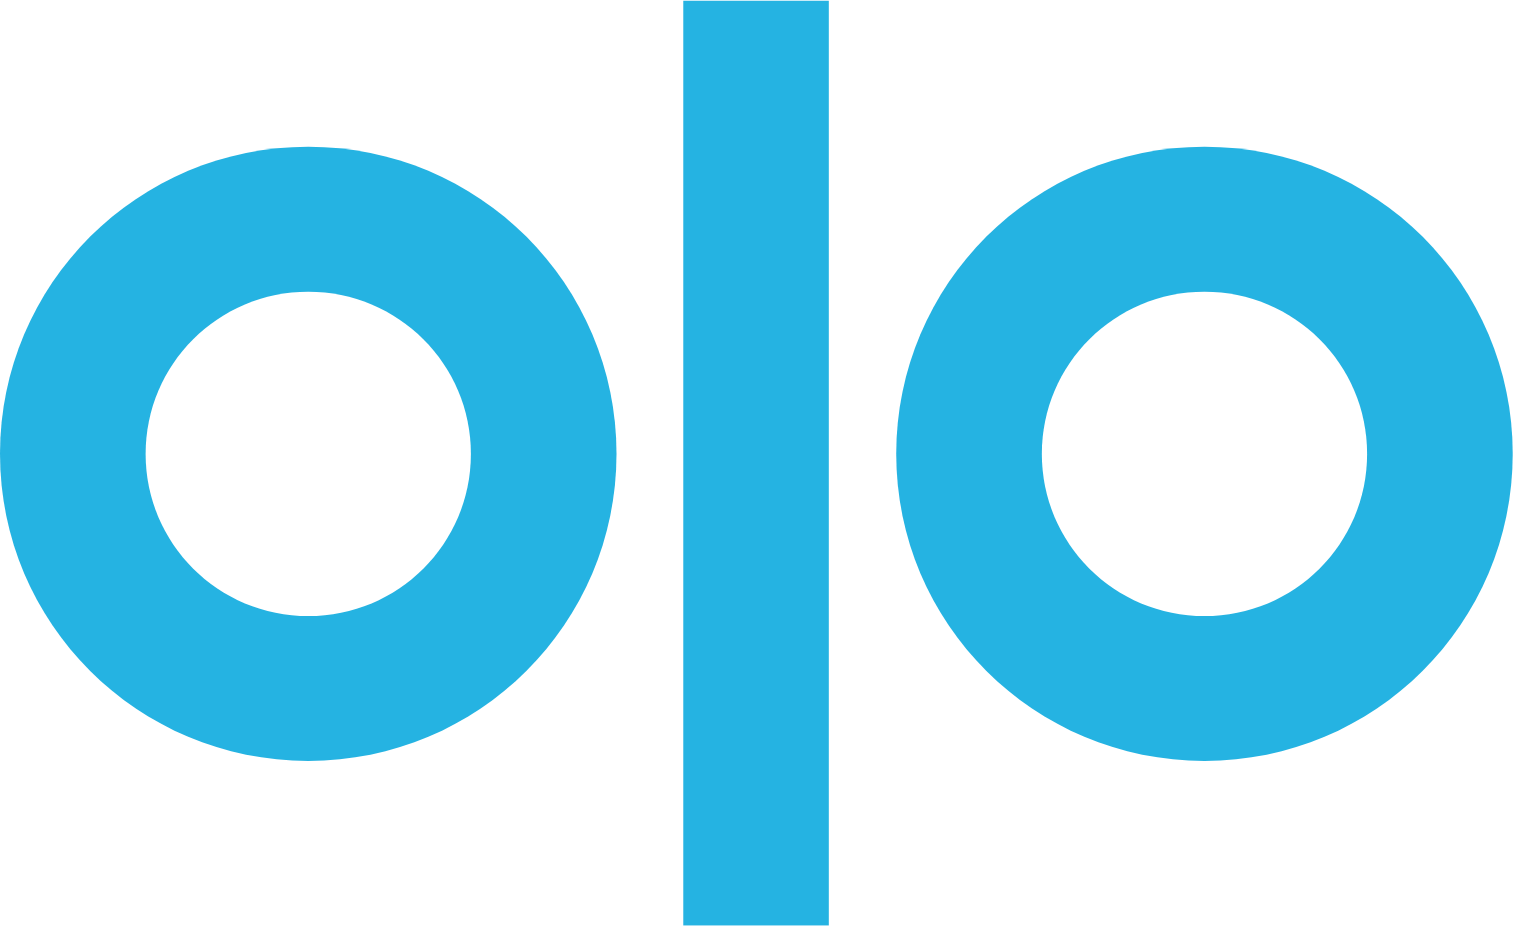 Olo logo in transparent PNG and vectorized SVG formats